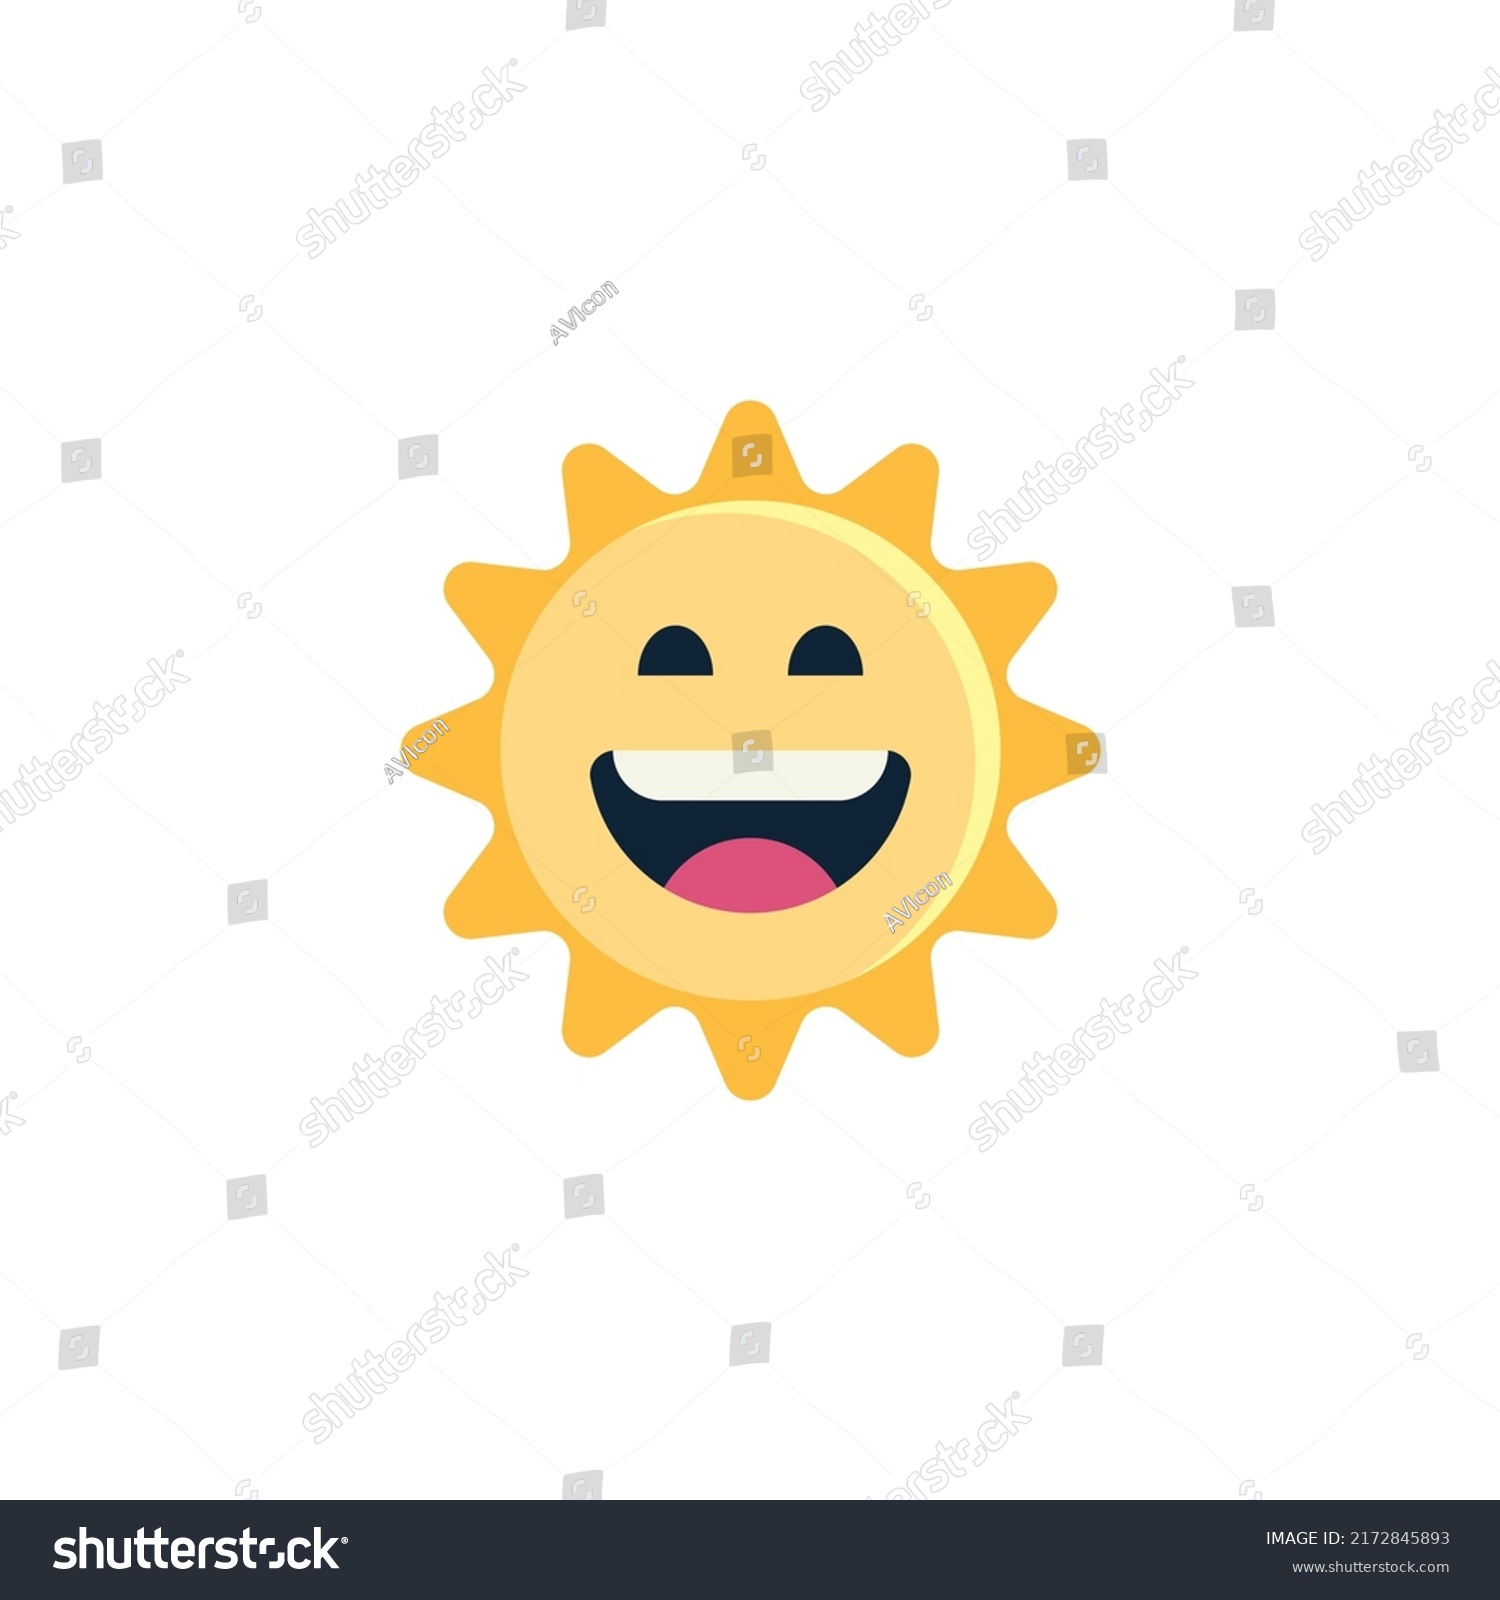 Sun Grinning Face Smiling Eyes Emoticon Stock Vector (Royalty Free ...